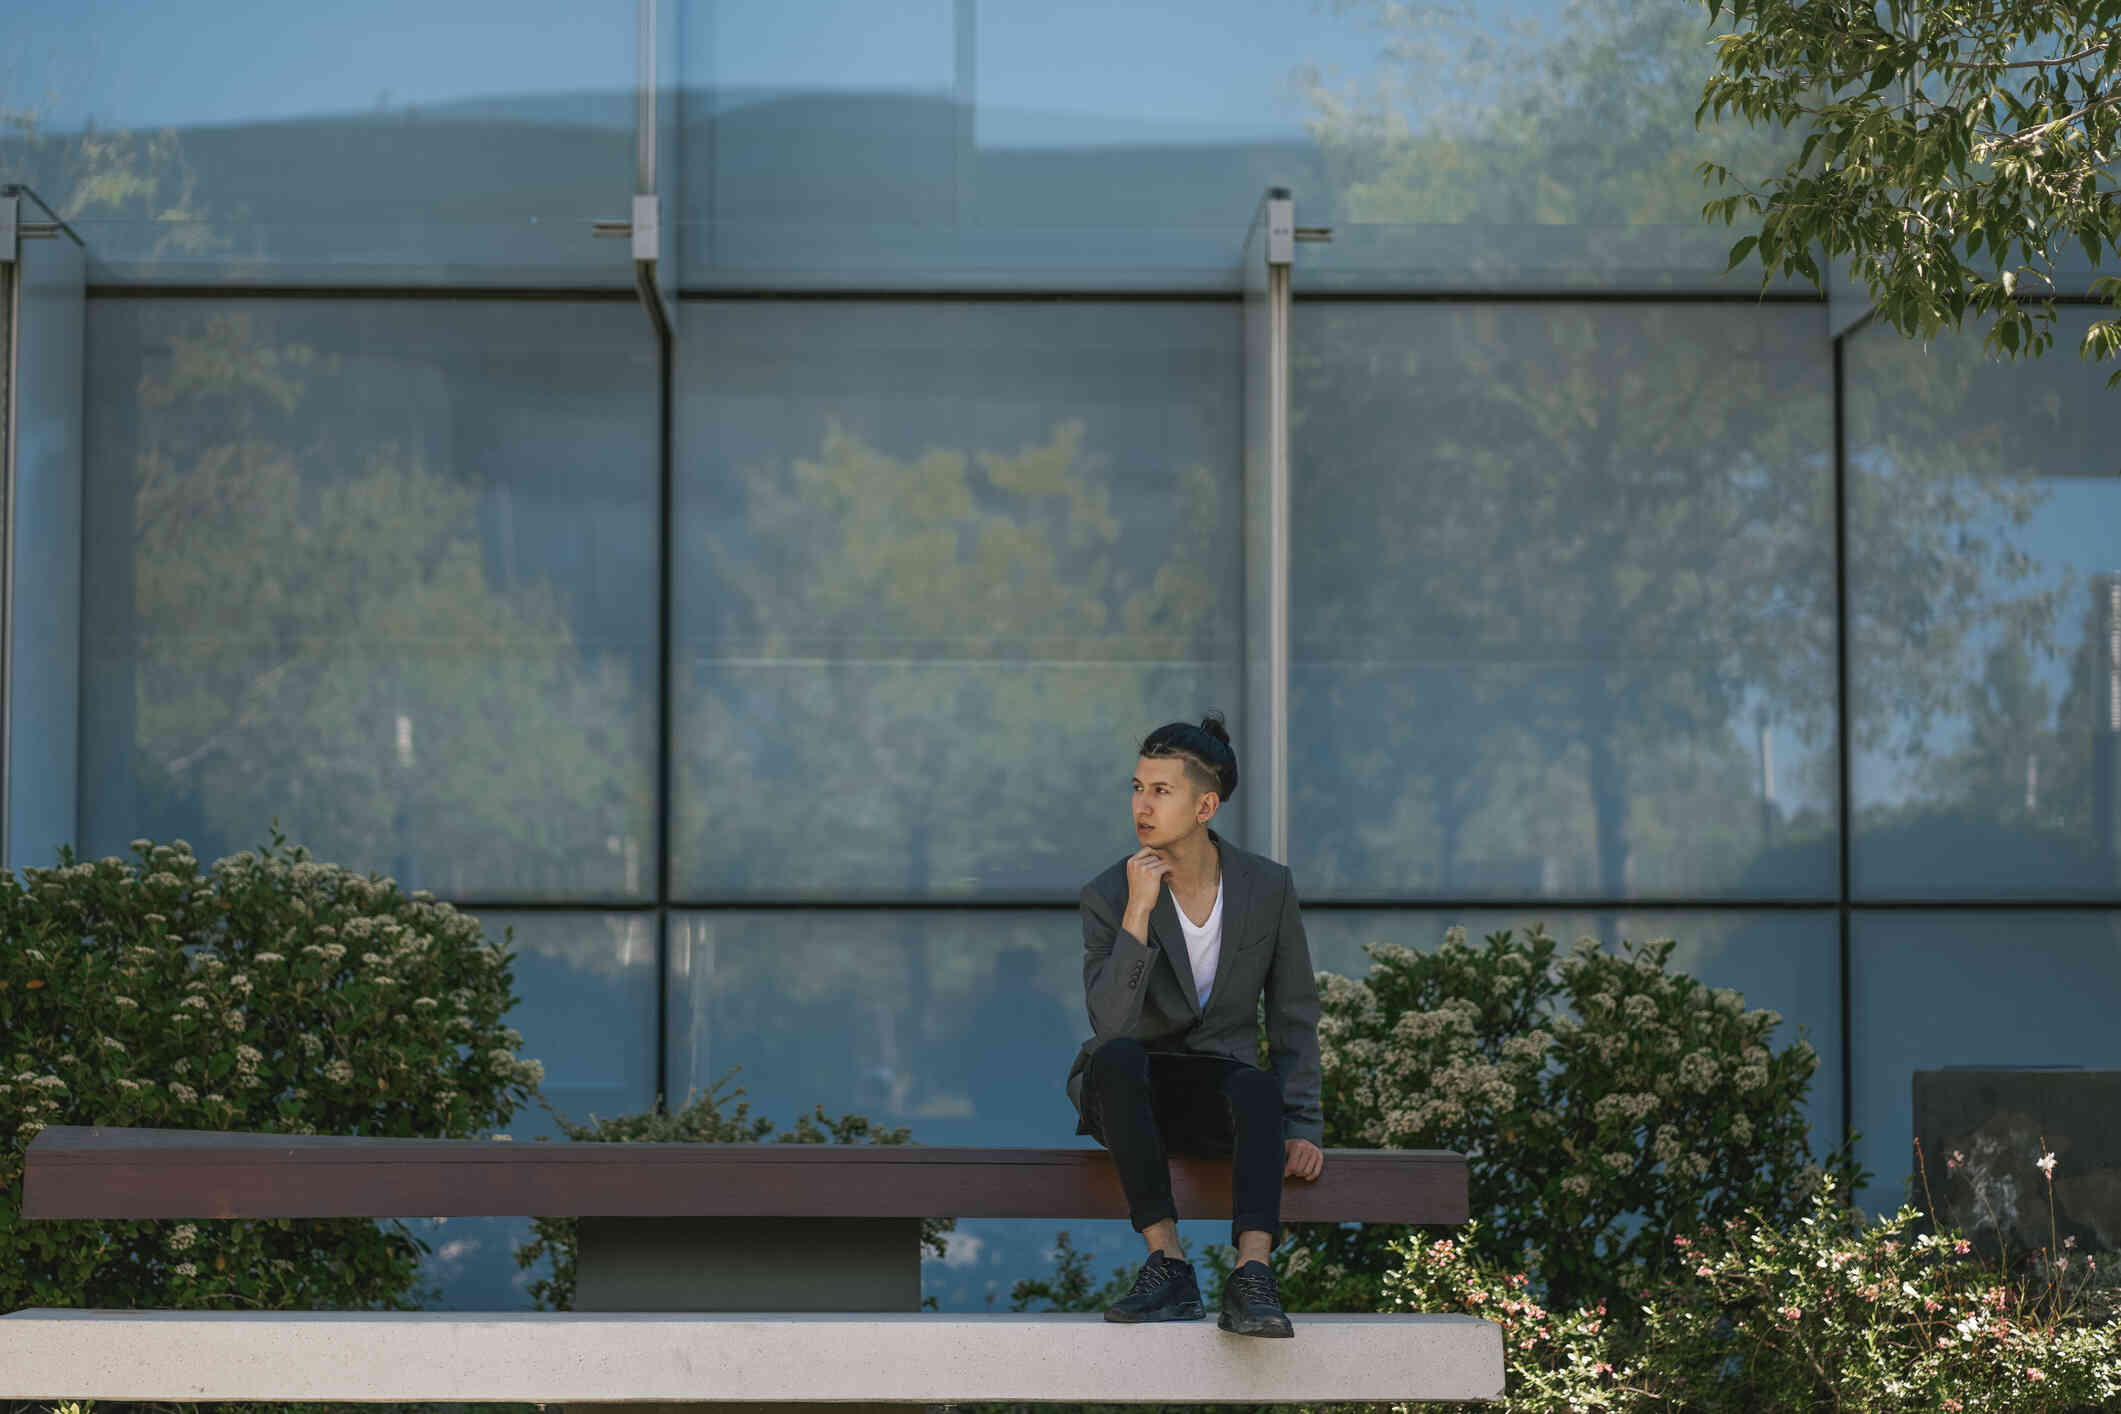 A man in a blazer sits on a bench outside of a building with his head resting on his hand and a thoughtful expression.